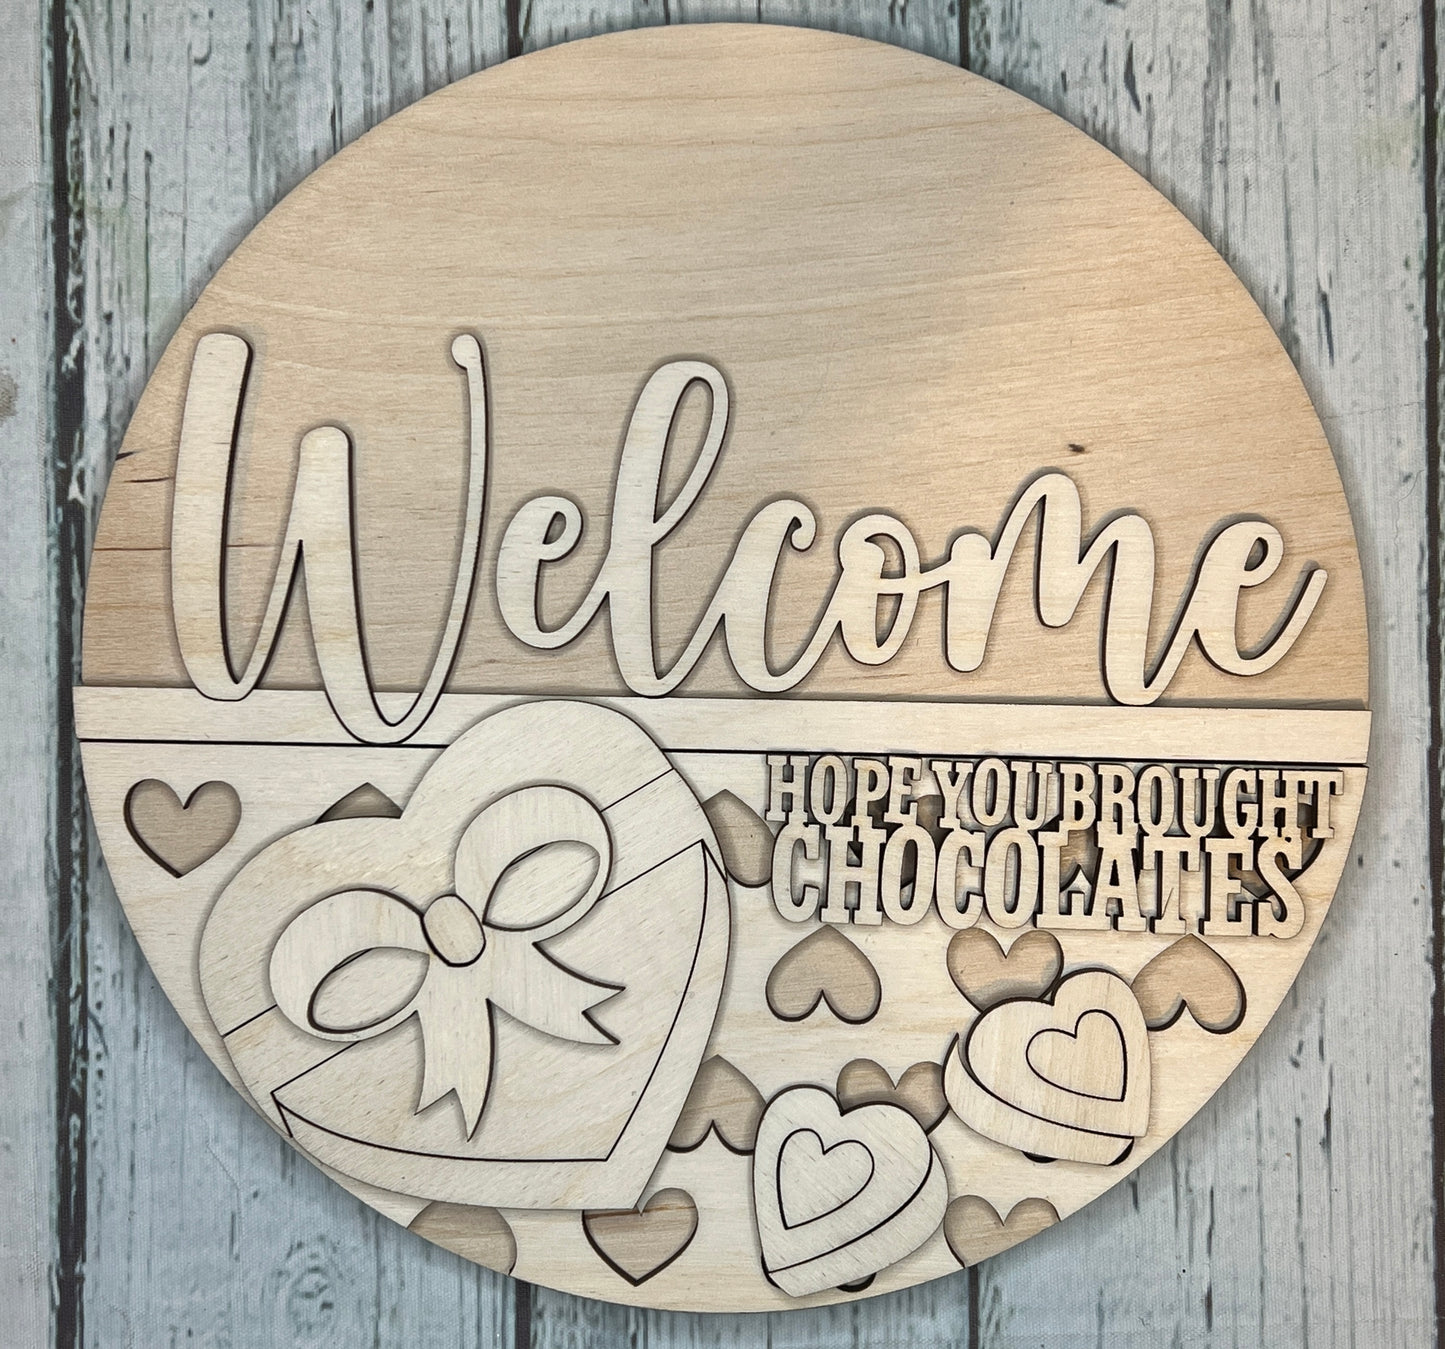 Welcome - Hope you brough Chocolates - DIY Blank Wood Sign